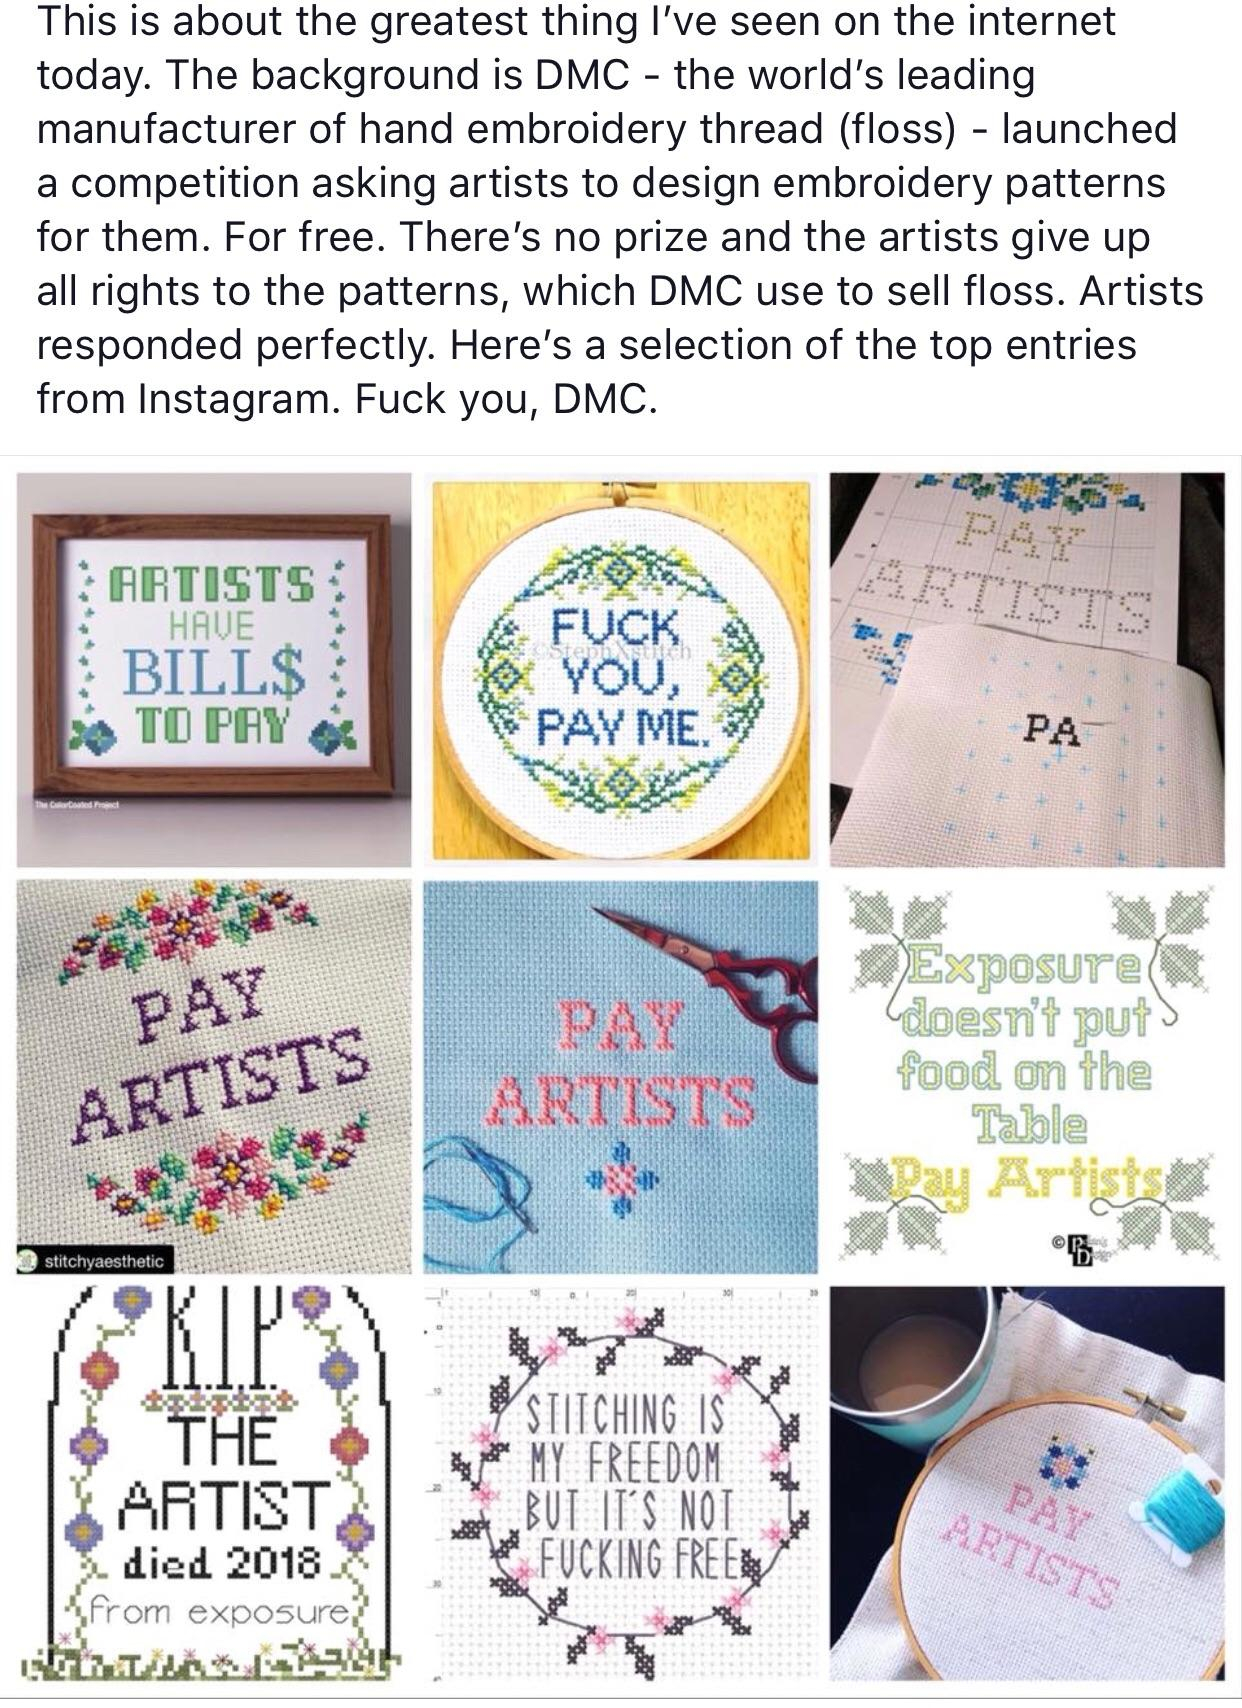 Dmc Embroidery Patterns Floss Company Asked For Free Designs The Artists Responded